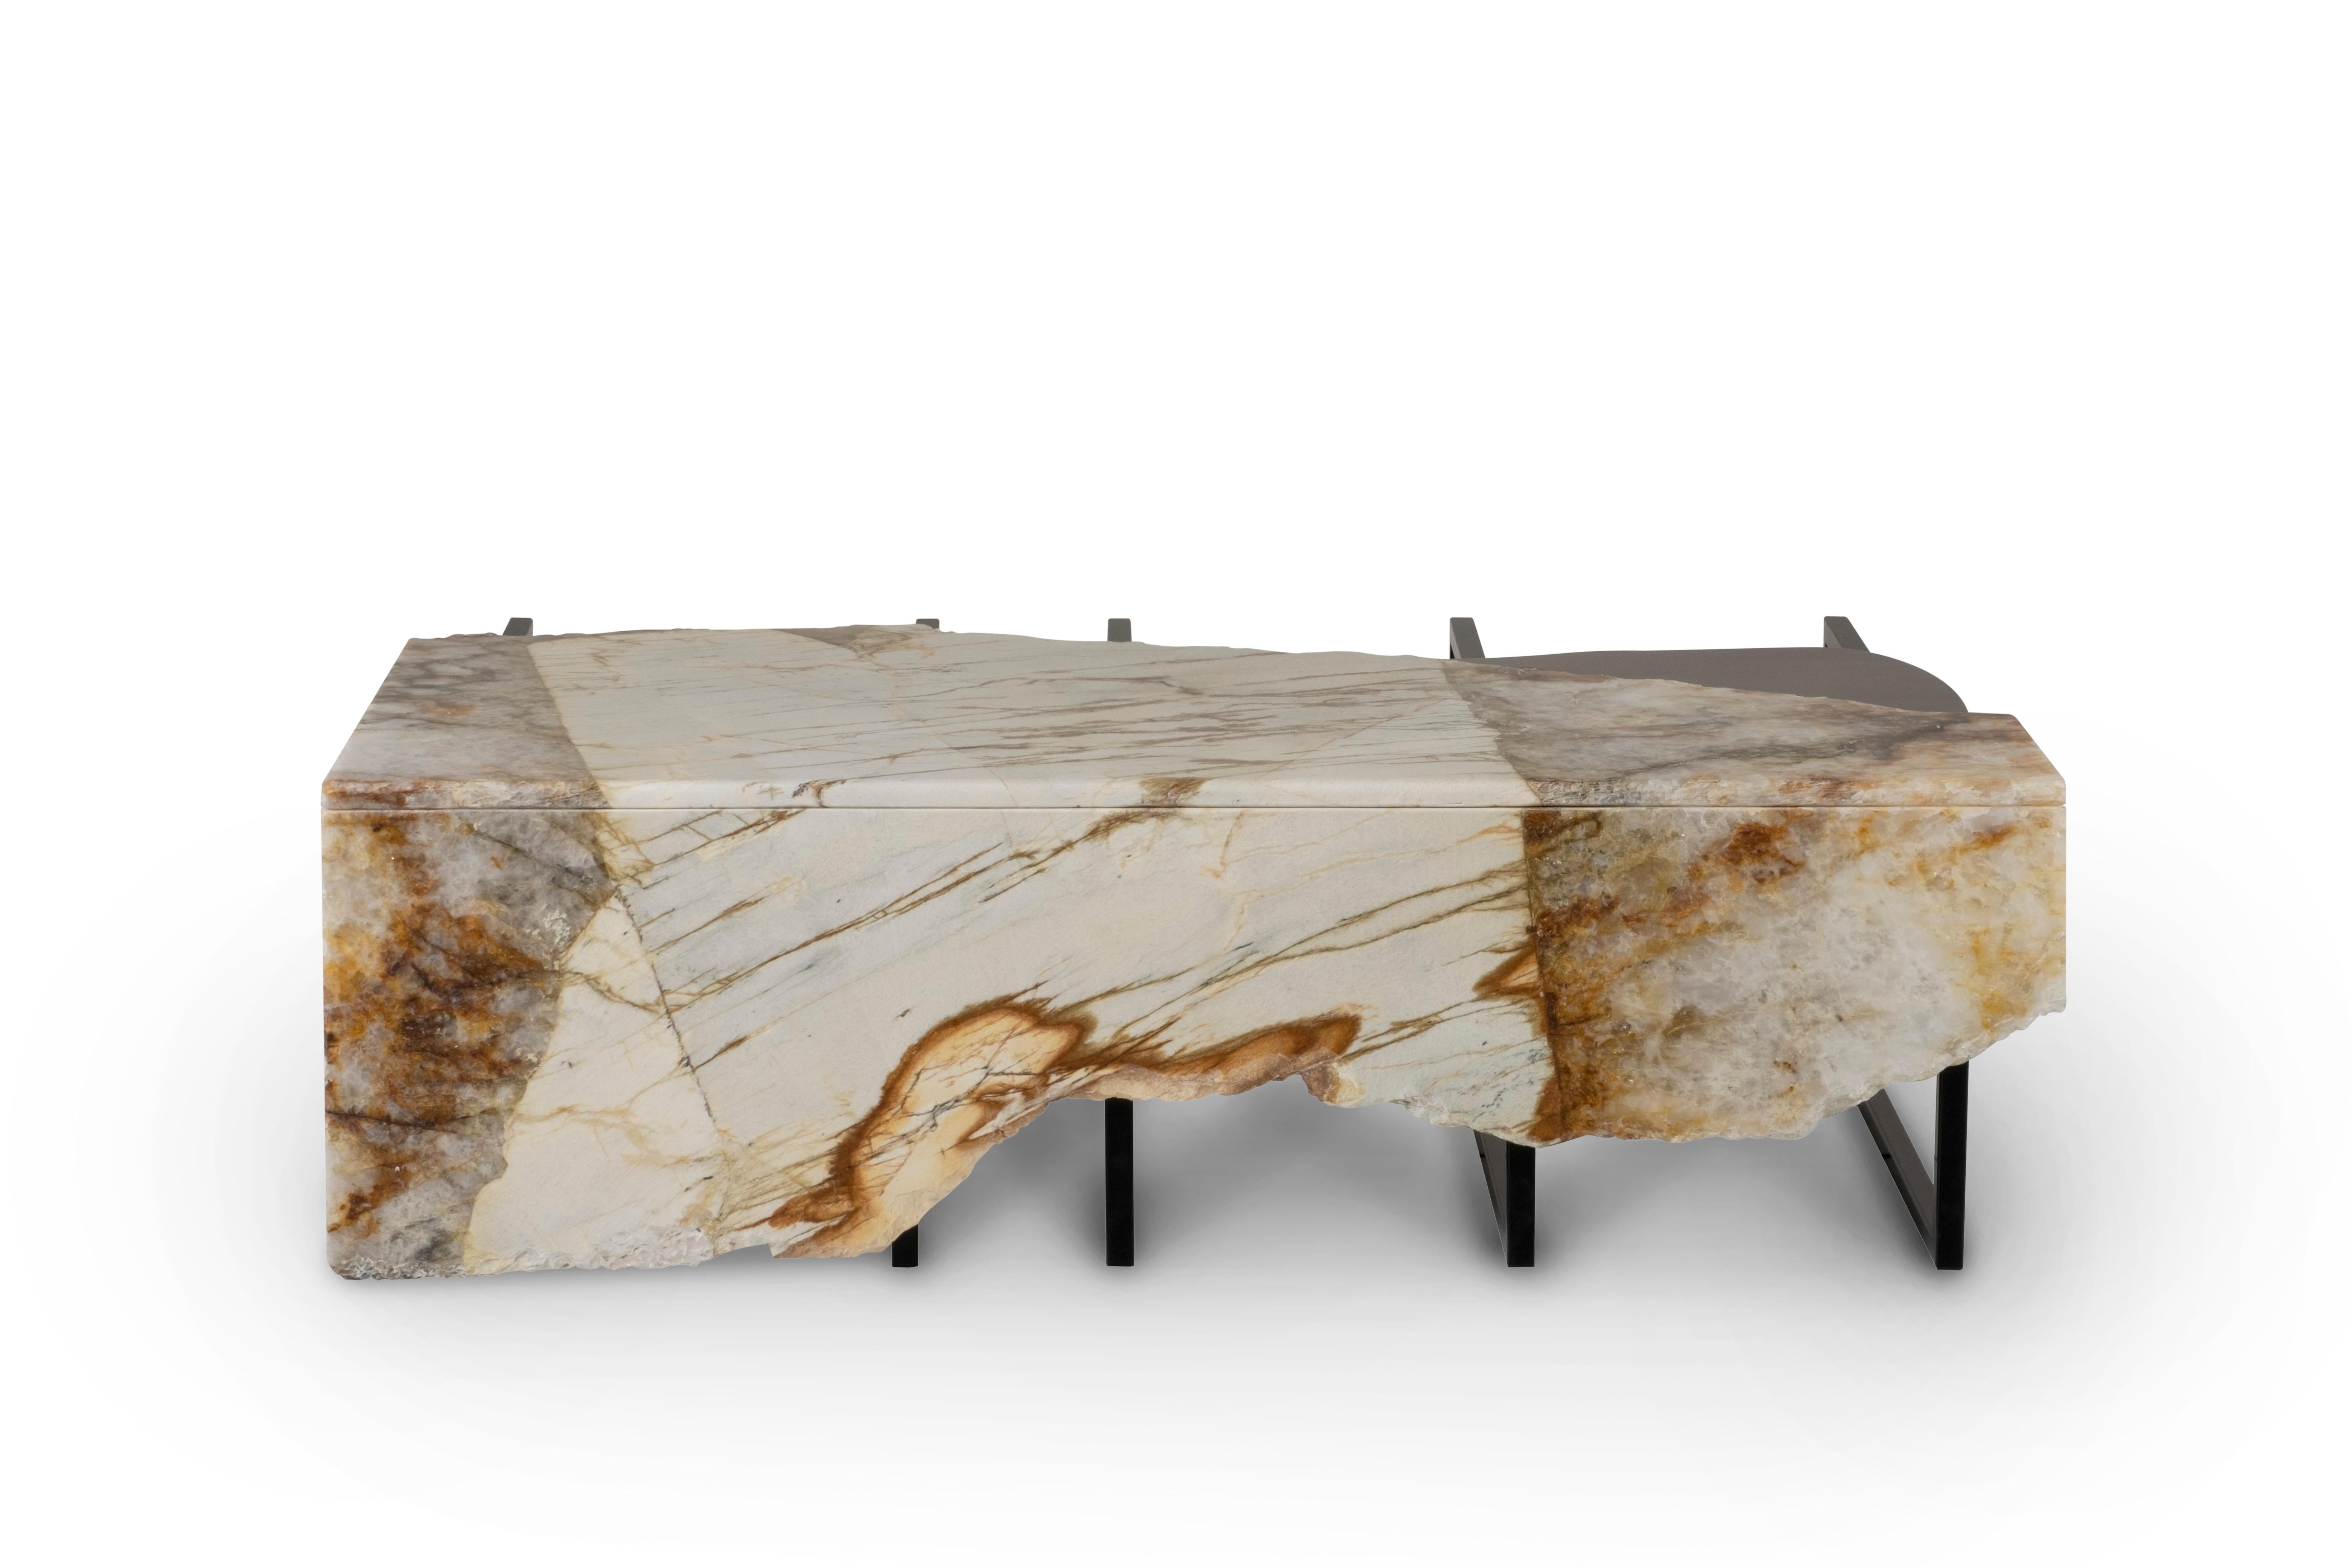 Aire coffee table, Contemporary Collection, Handcrafted in Portugal - Europe by Greenapple.

Designed by Rute Martins for the Contemporary Collection, the Aire marble coffee table features a bold and distinctive design, seamlessly complementing